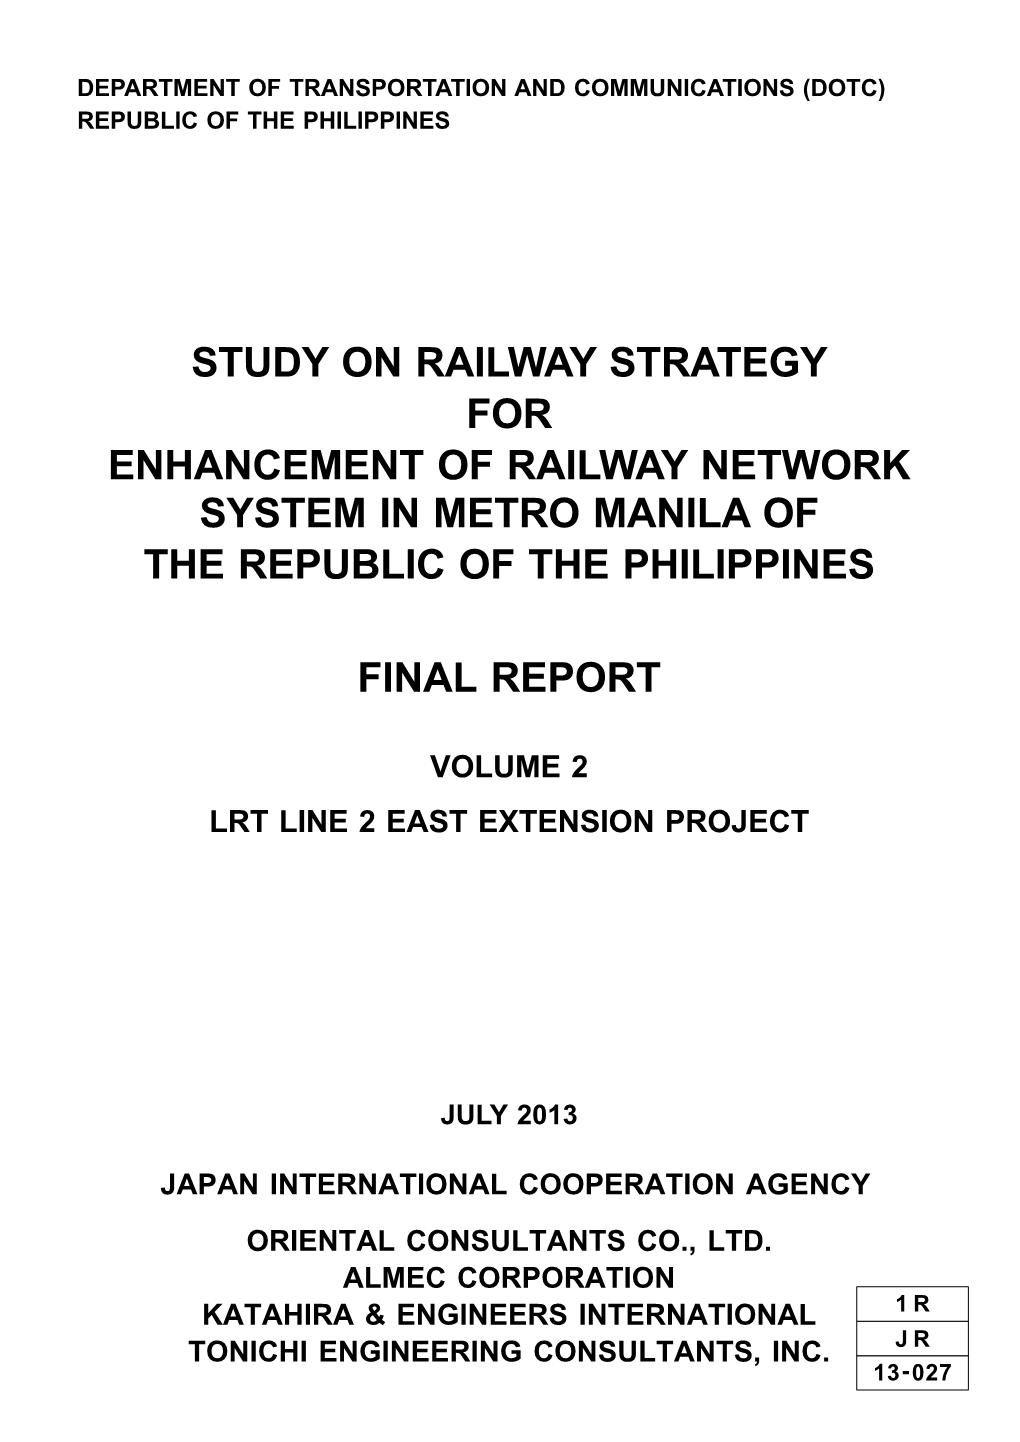 Study on Railway Strategy for Enhancement of Railway Network System in Metro Manila of the Republic of the Philippines